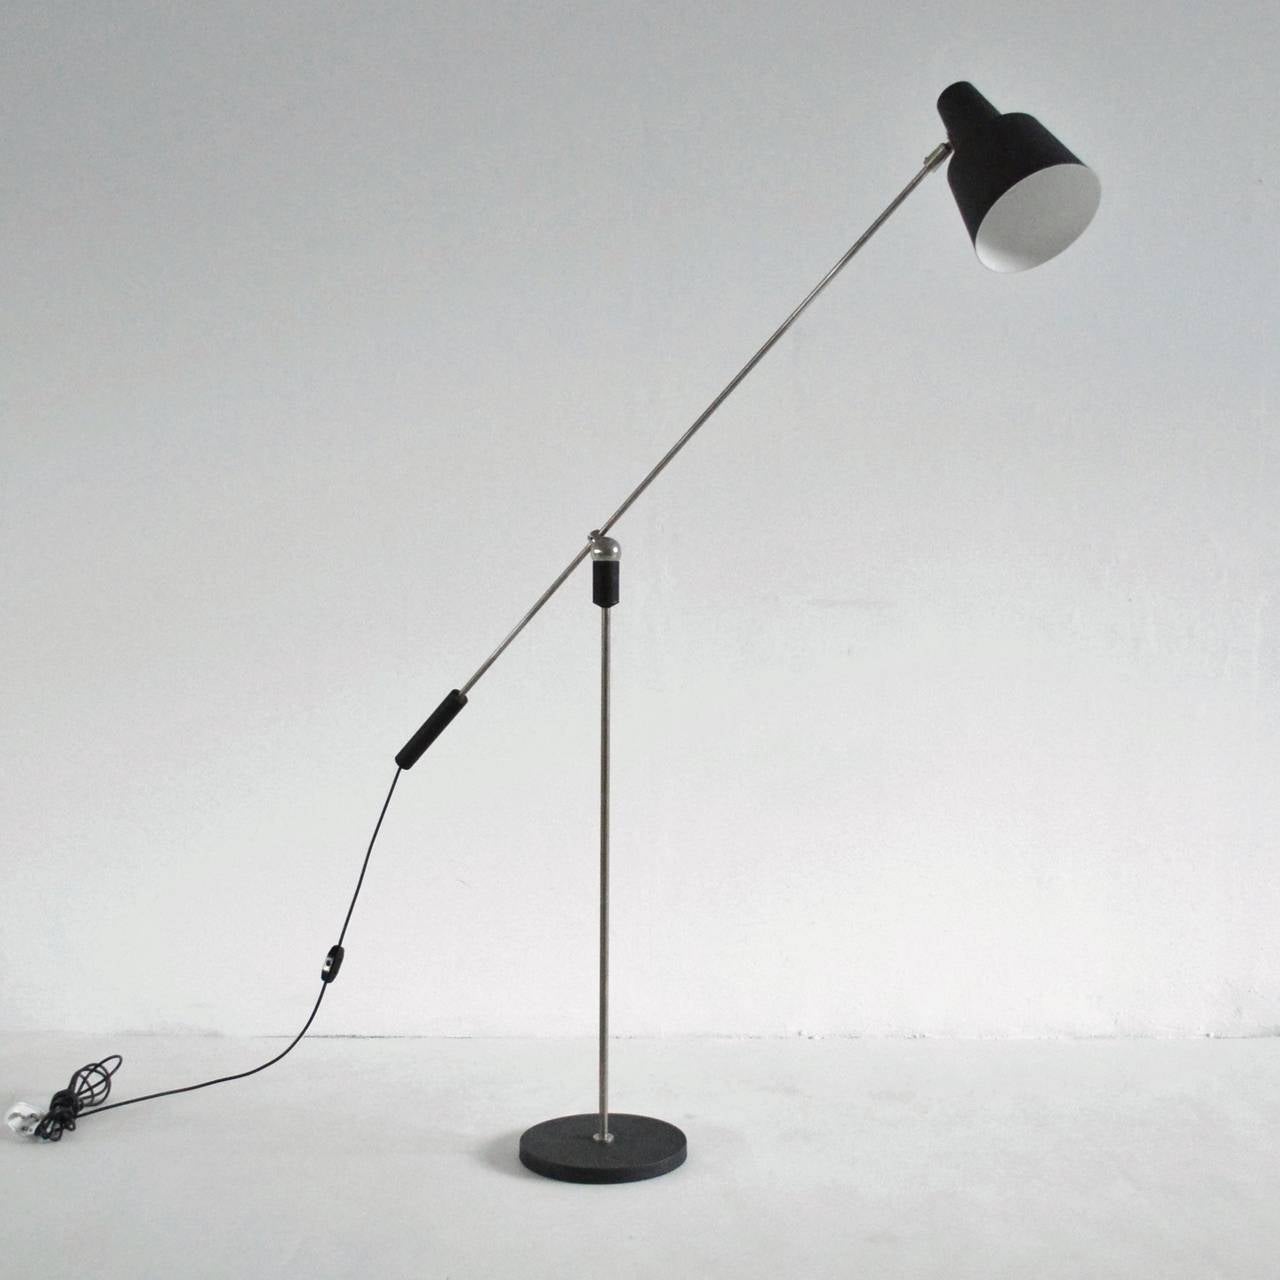 An exceptionally rare version of the magneto lamp designed by H. Fillekes. The lamp was only produced for a short period by Artifort from 1954-1958. There weren't many made and they were assembled by hand. The lamp articulates around a magnetic ball